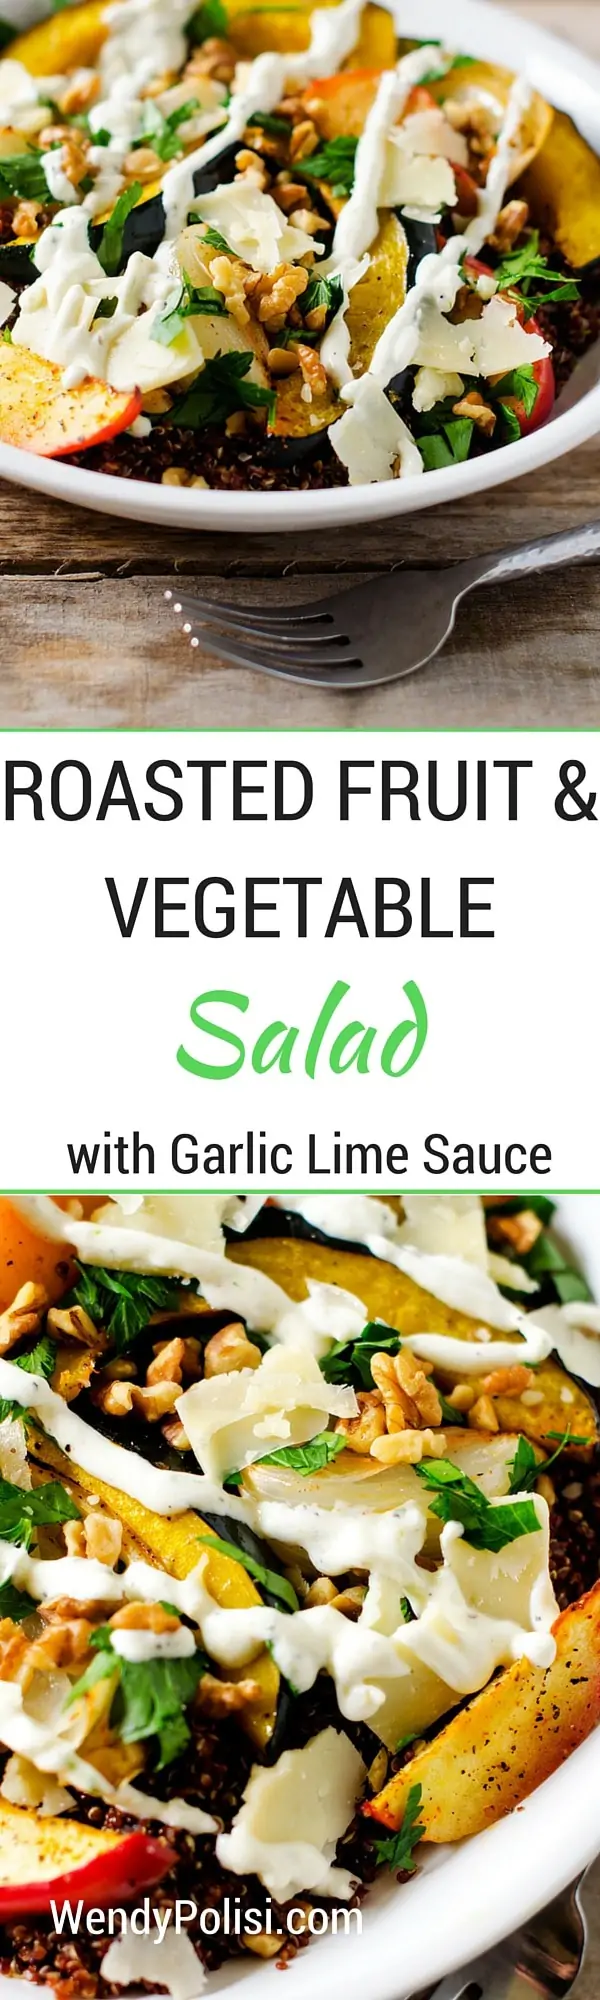 Roasted Fruit & Vegetable Salad with Garlic Lime Sauce